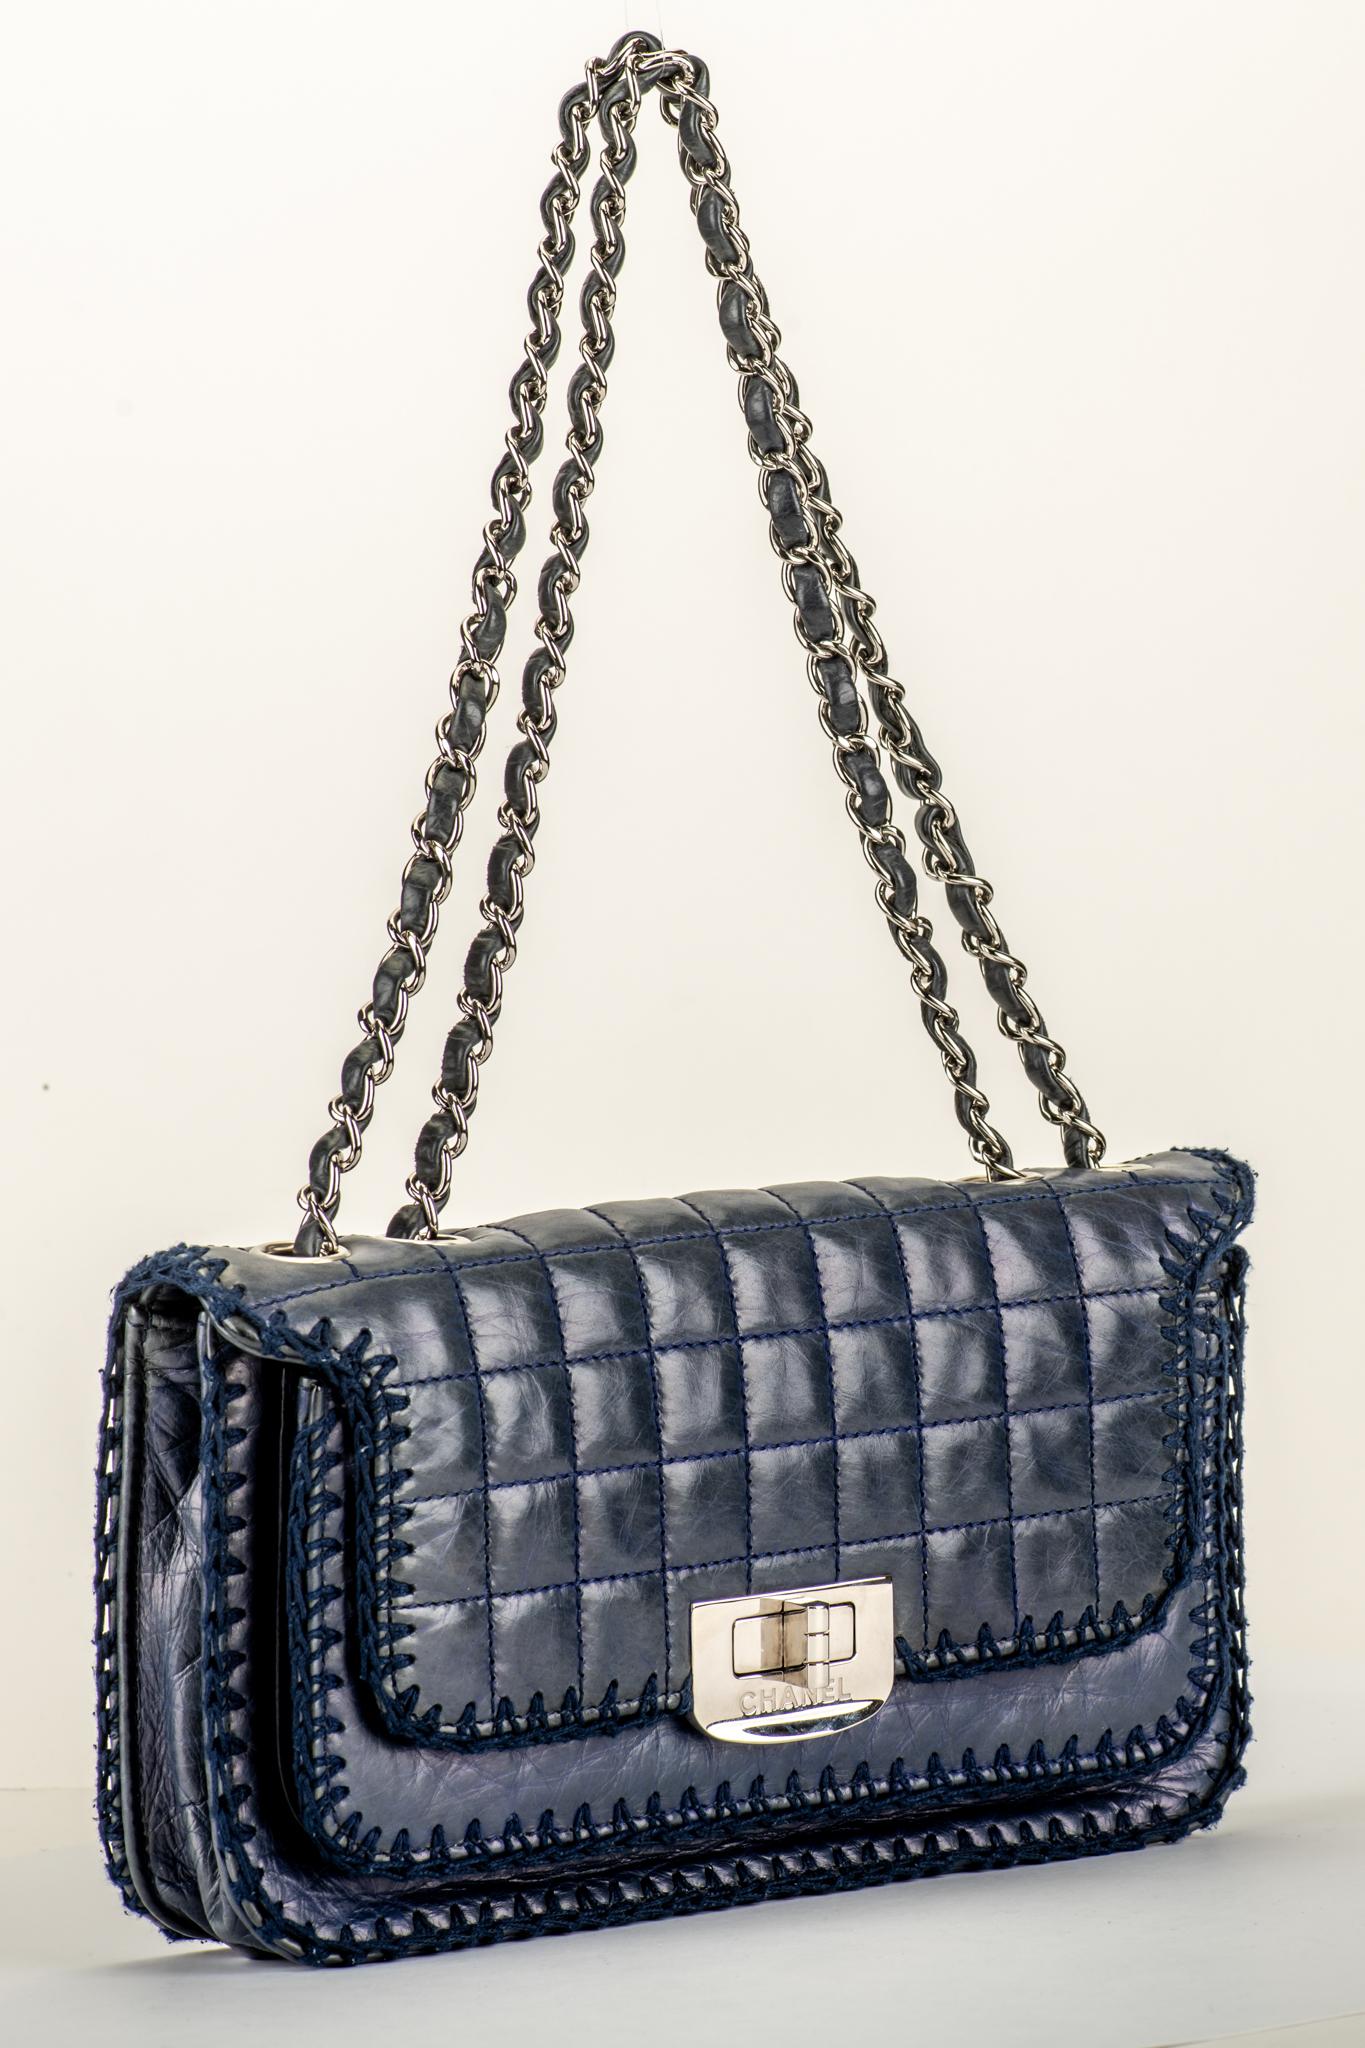 Chanel navy blue leather flap bag with crochet trim. Shoulder drop 9.5/17. Comes with hologram and dust cover.